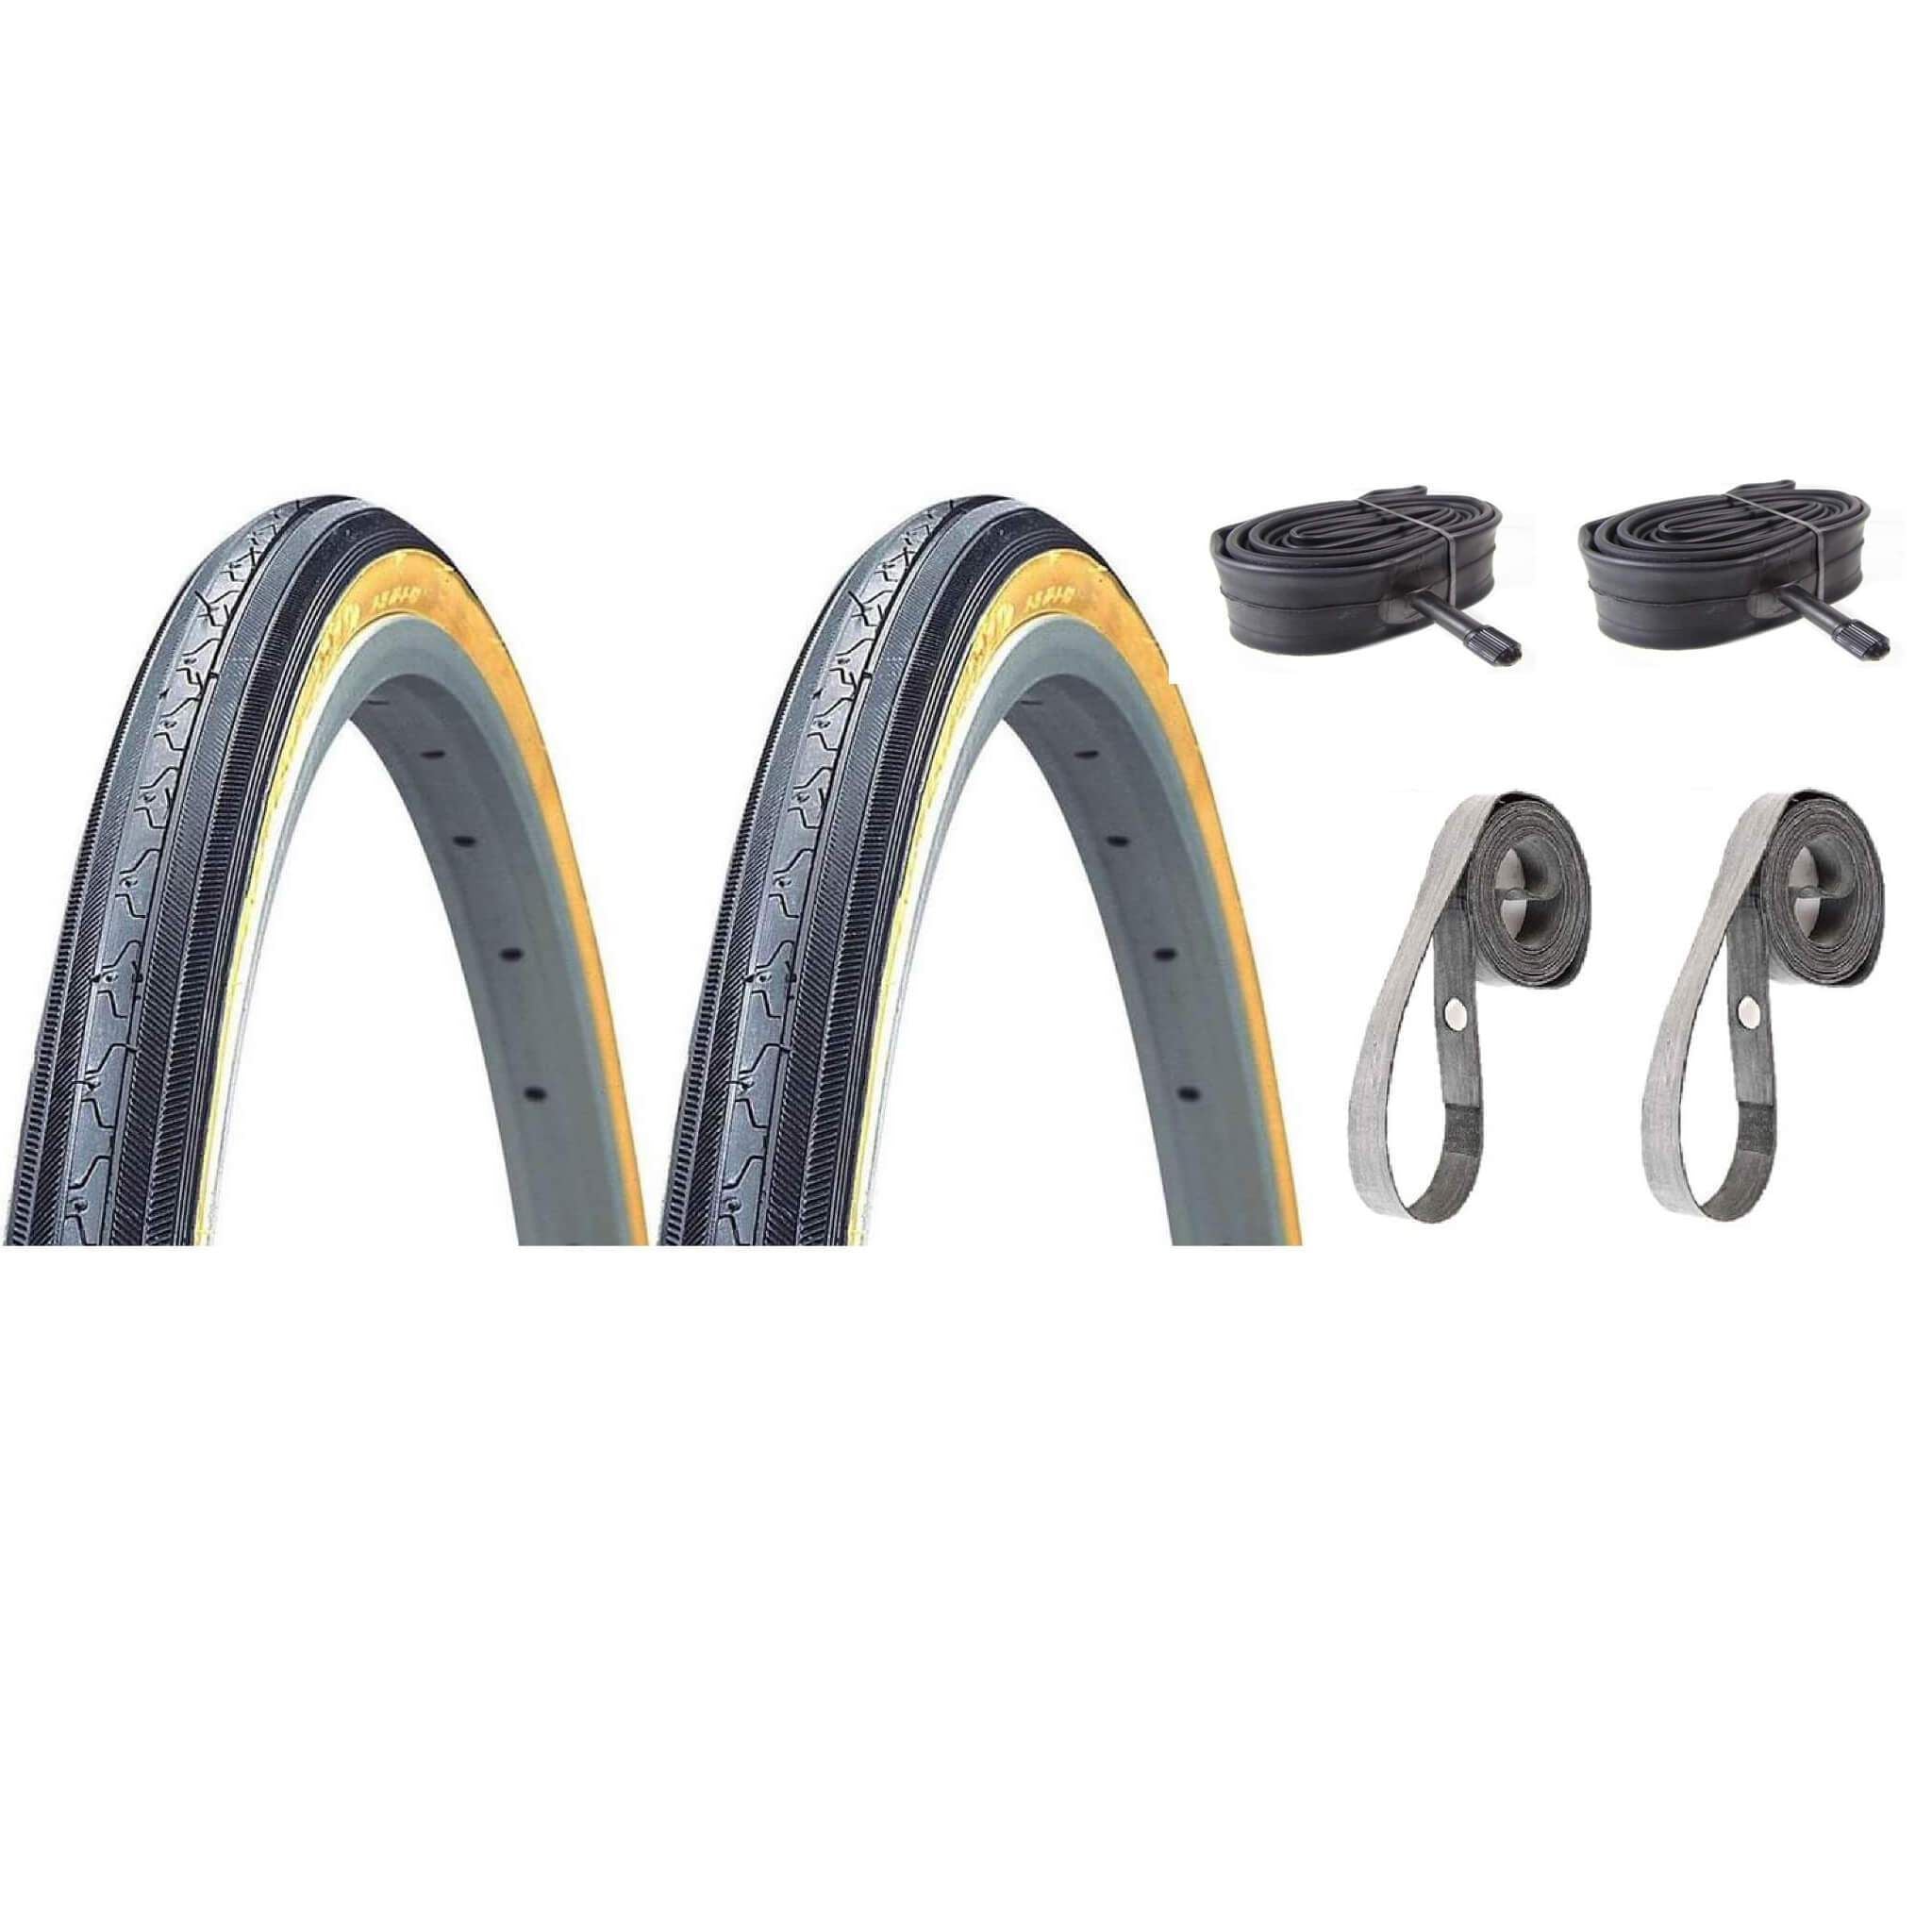 K35 27x1-1/4 Gum-wall Tire with Schrader tube and rubber strips